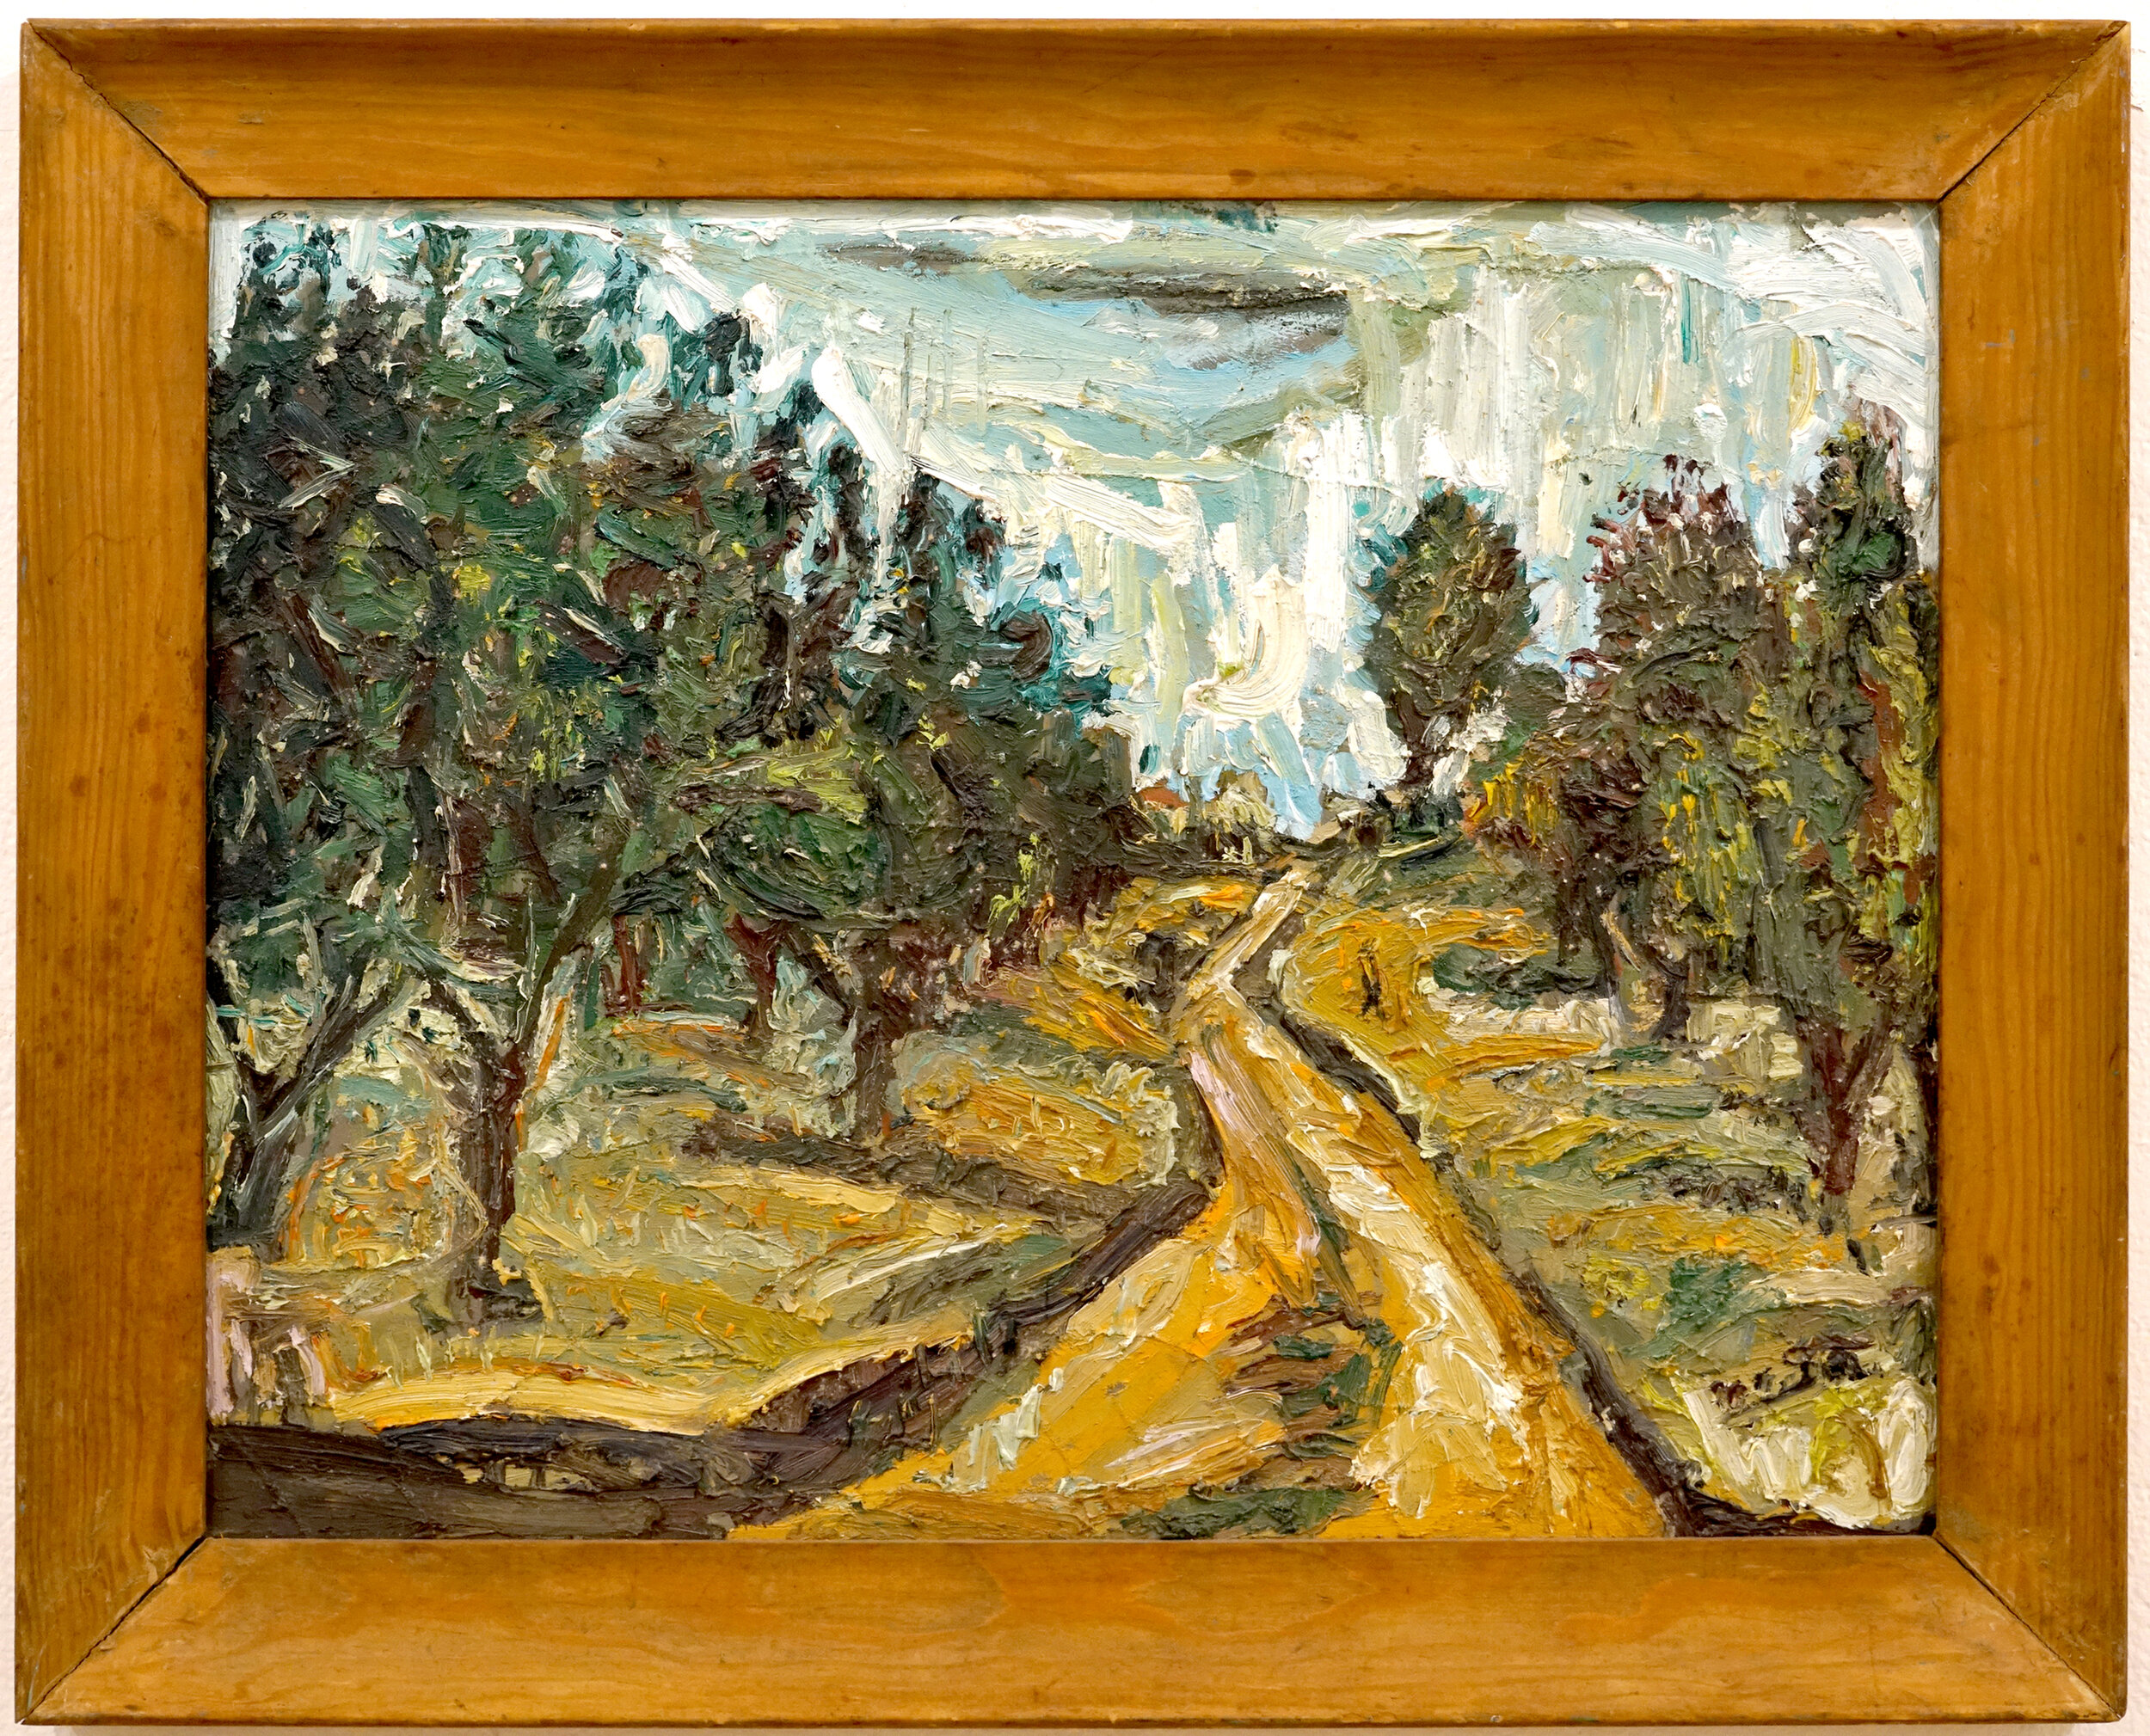  Sam Altekruse (PiV ‘84),  Orchard , 1992. Oil on panel, 20 x 24 in. 